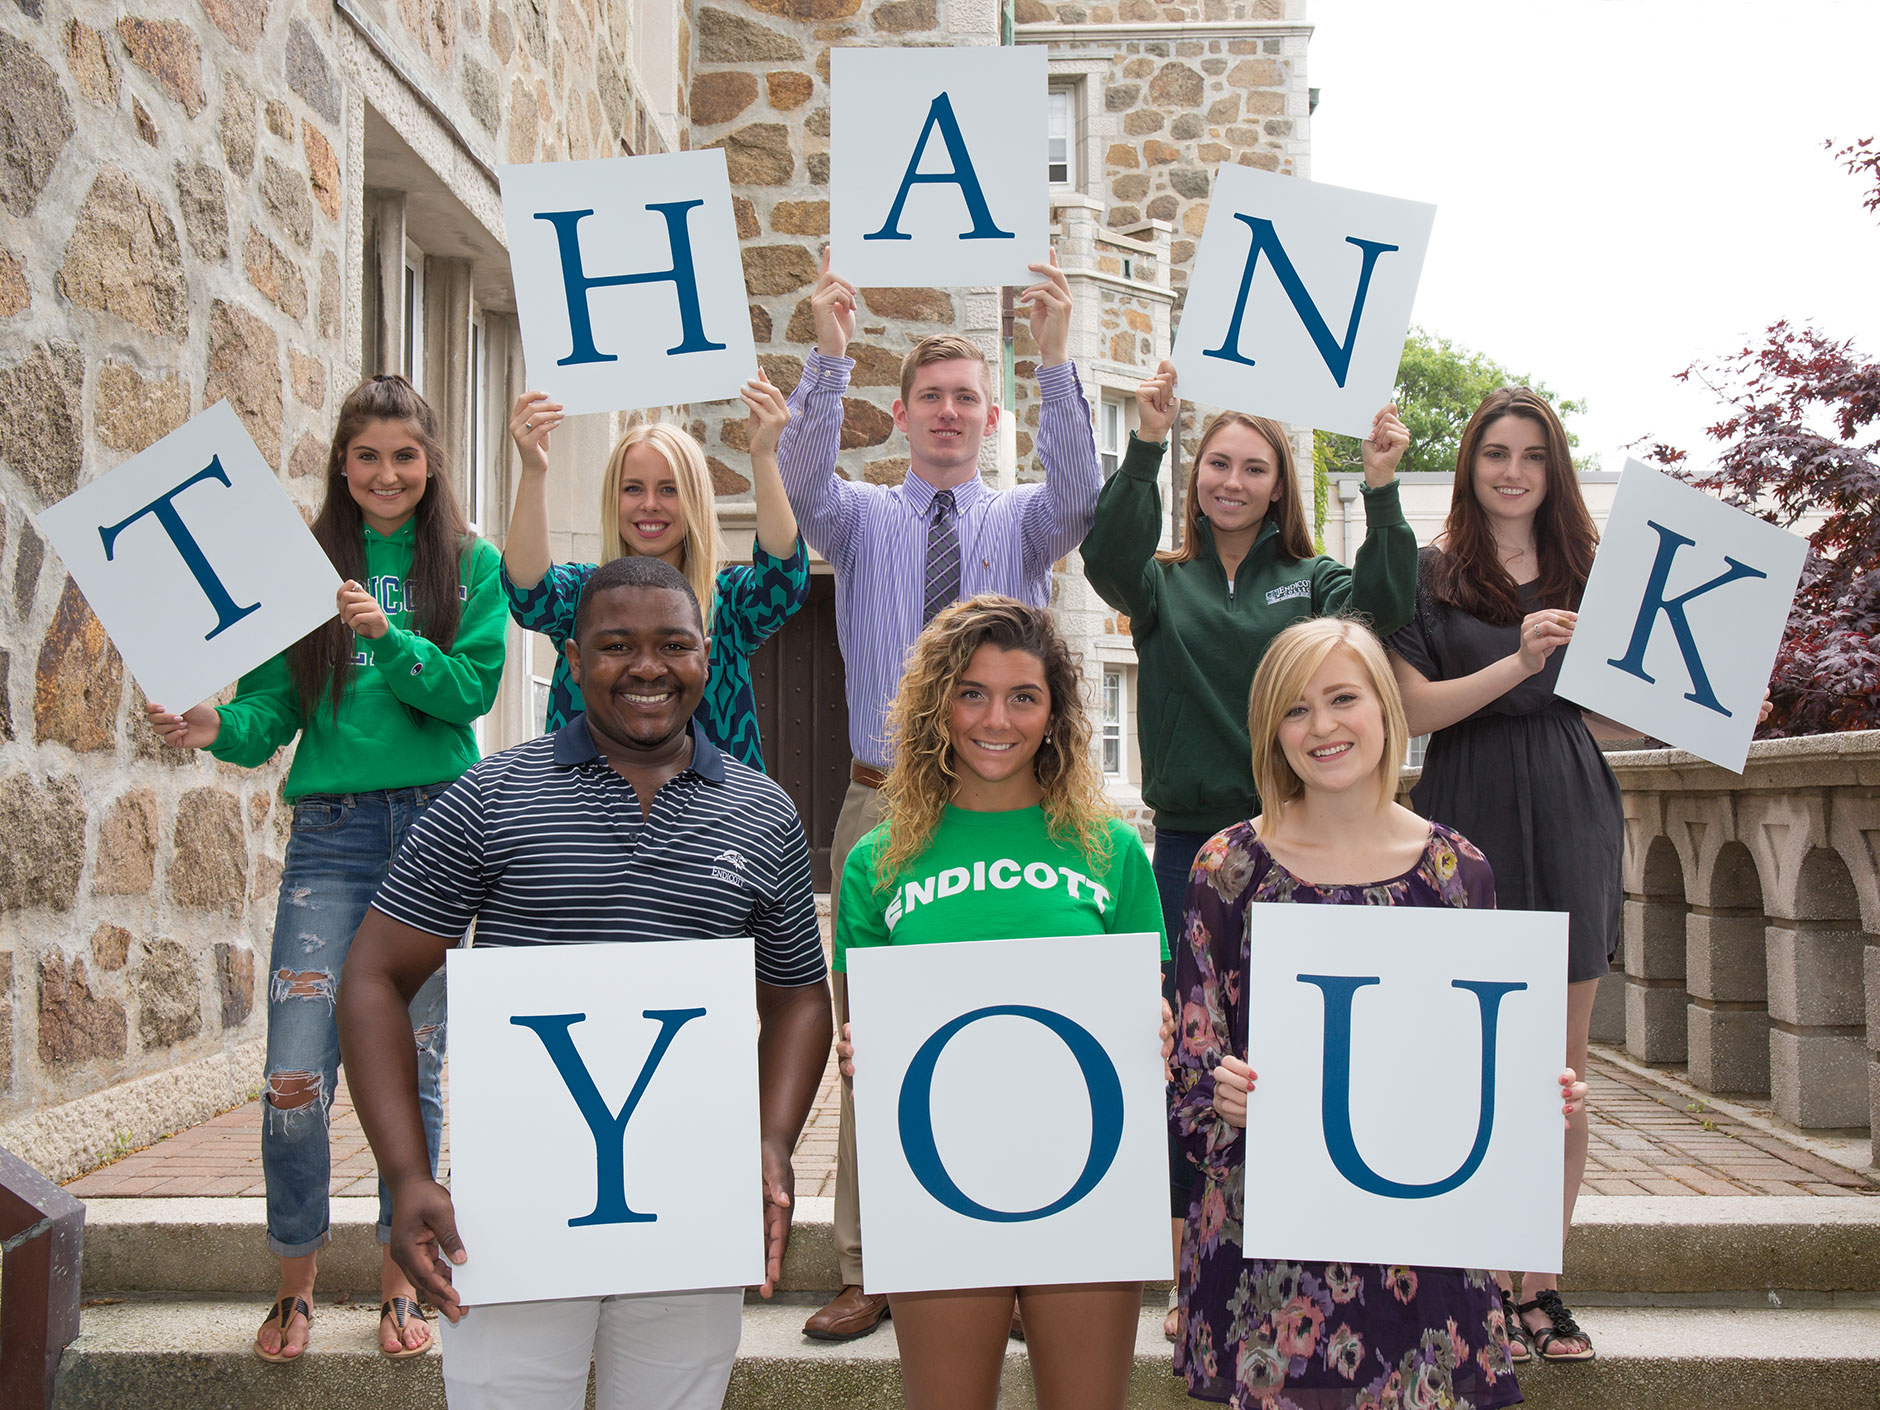 2018 was a banner year for Endicott giving. 